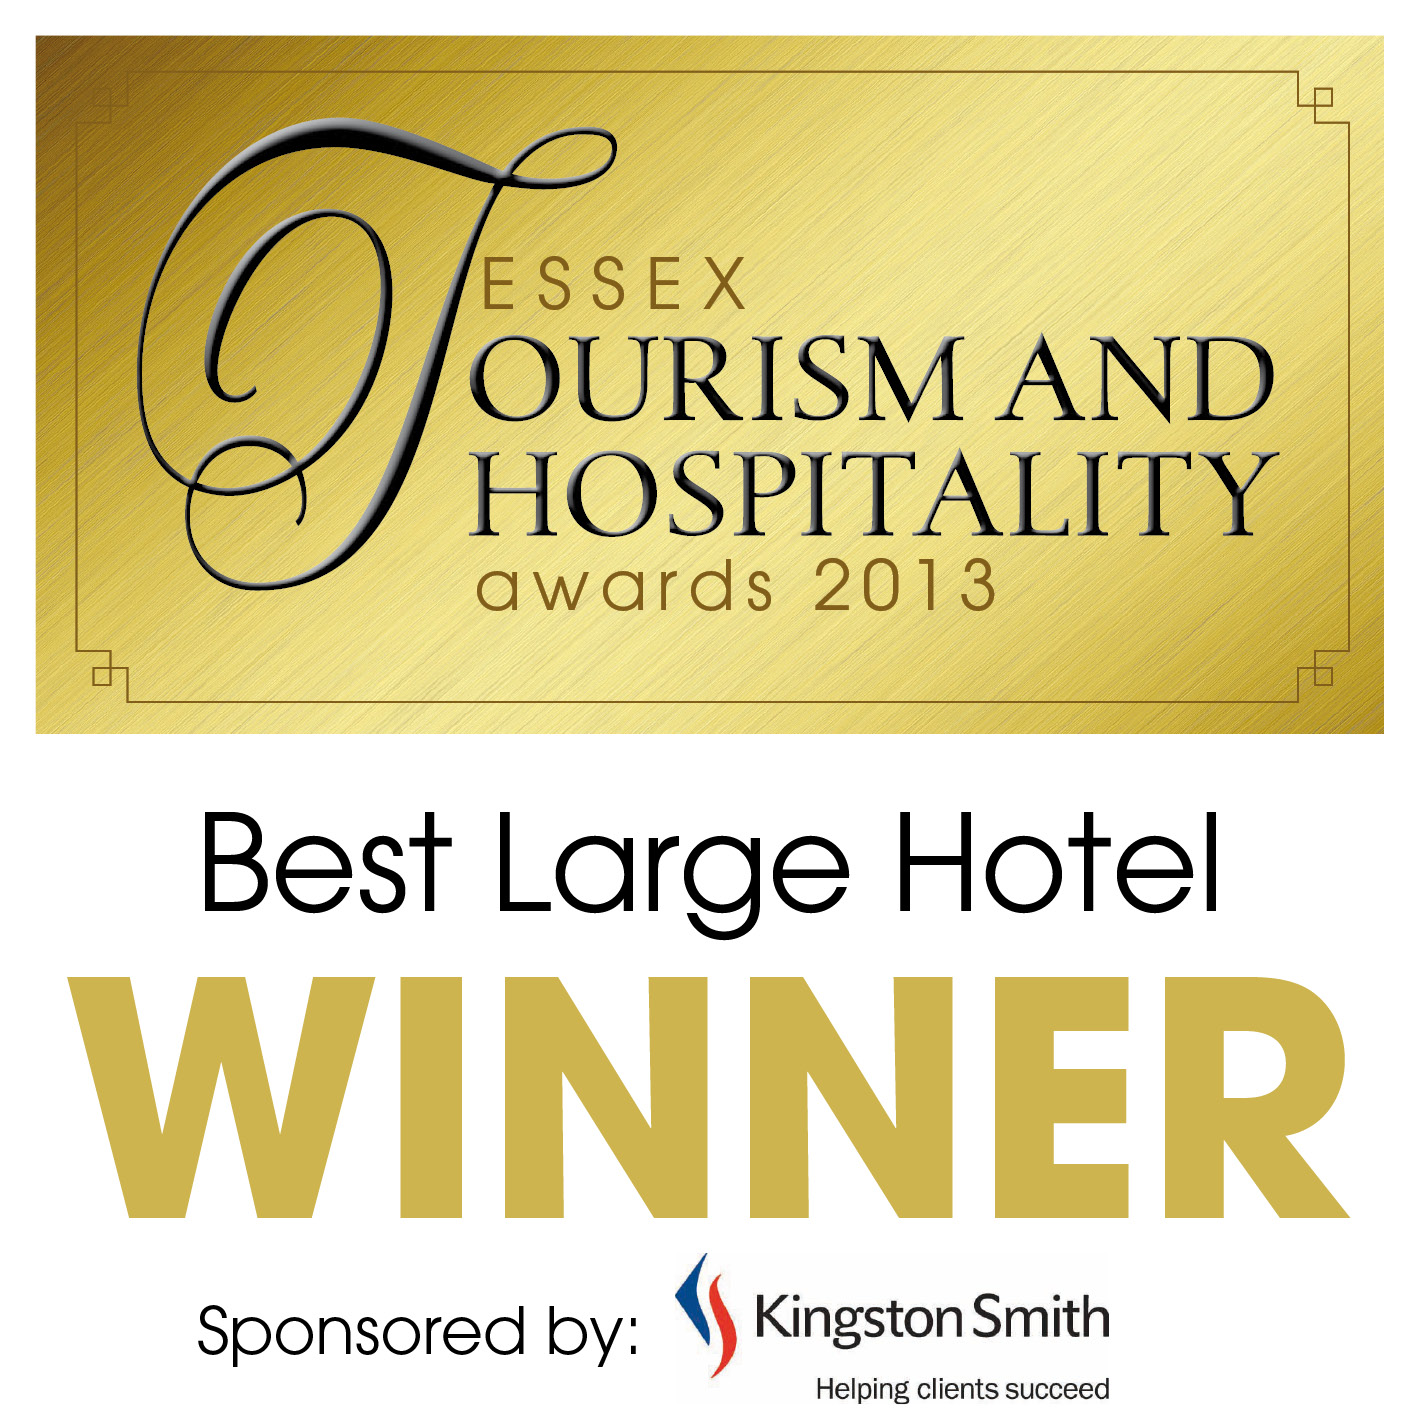 De Rougemont Manor wins Best Large Hotel Award with help from business coach Gina Gardiner